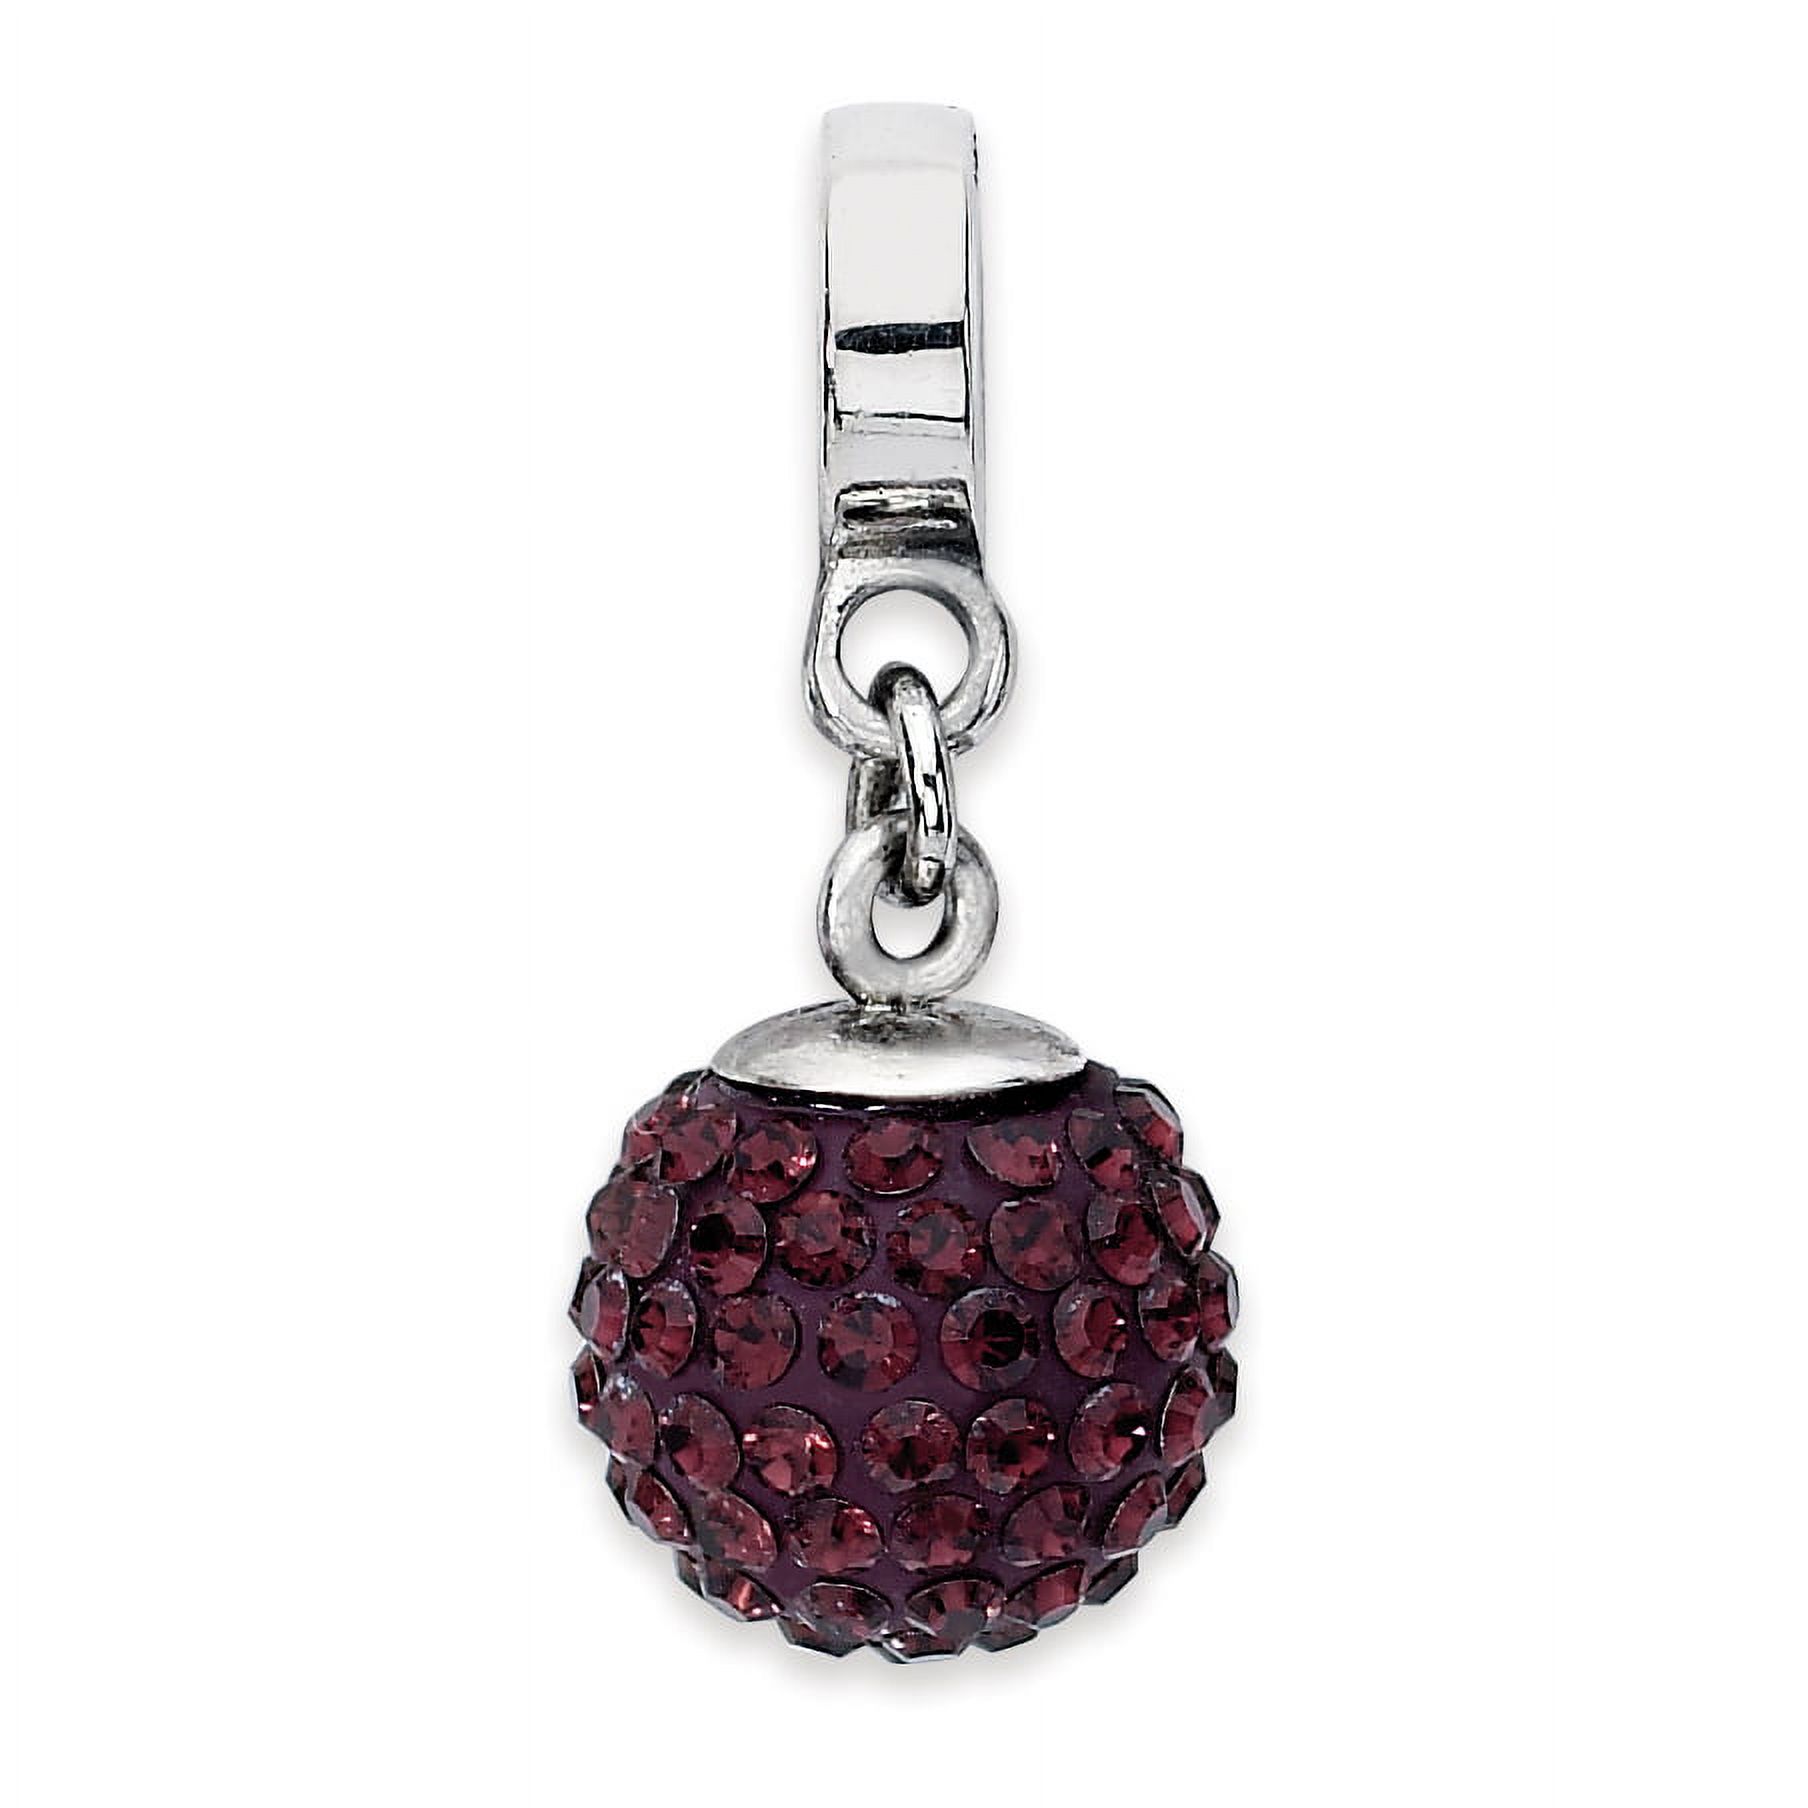 Reflection Beads Sterling Silver Reflections June Red Preciosa Crystal Ball Dangle Bead - image 1 of 2